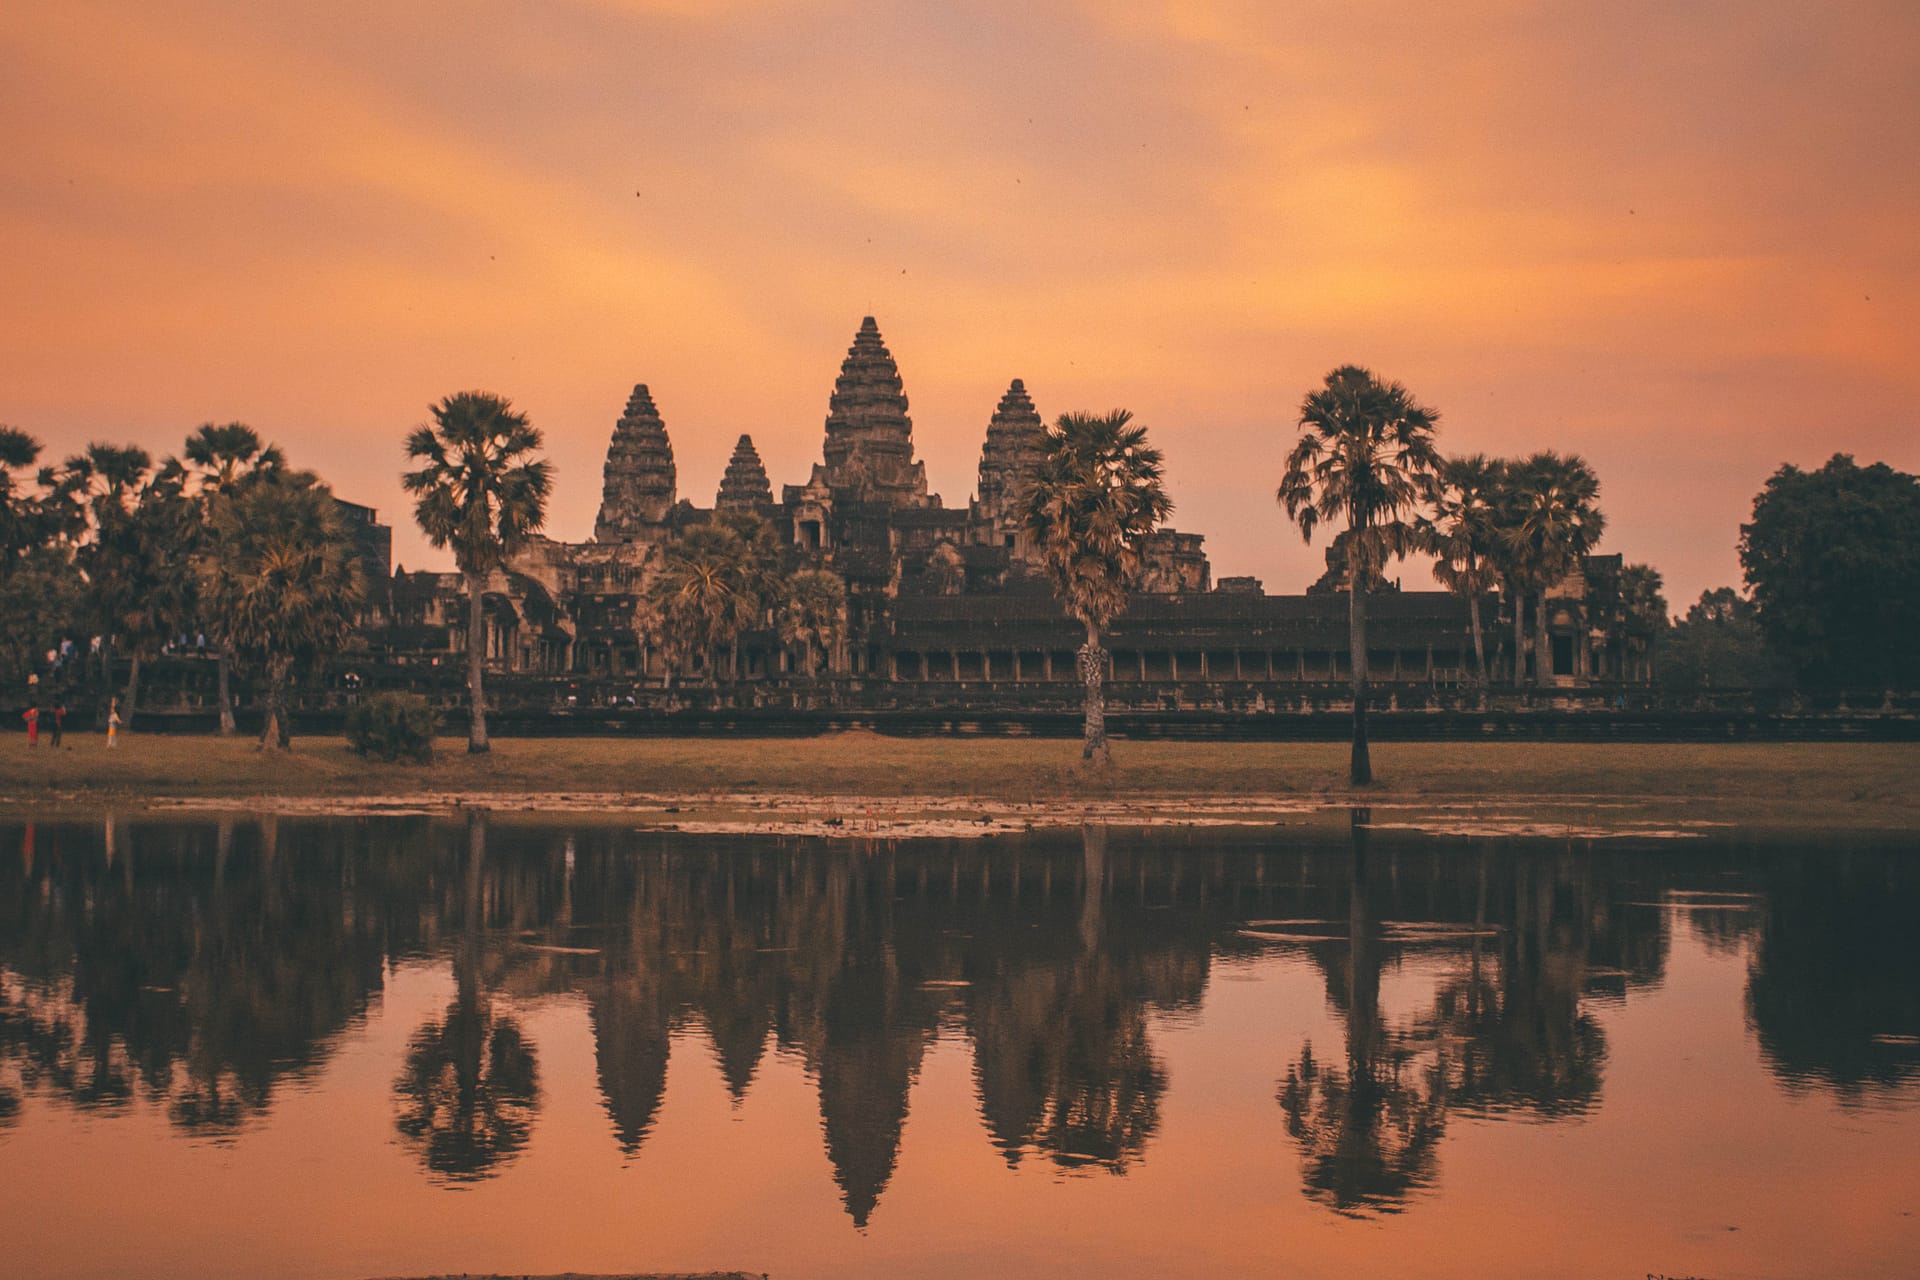 Sunset at Cambodia - Places to Watch Sunsets